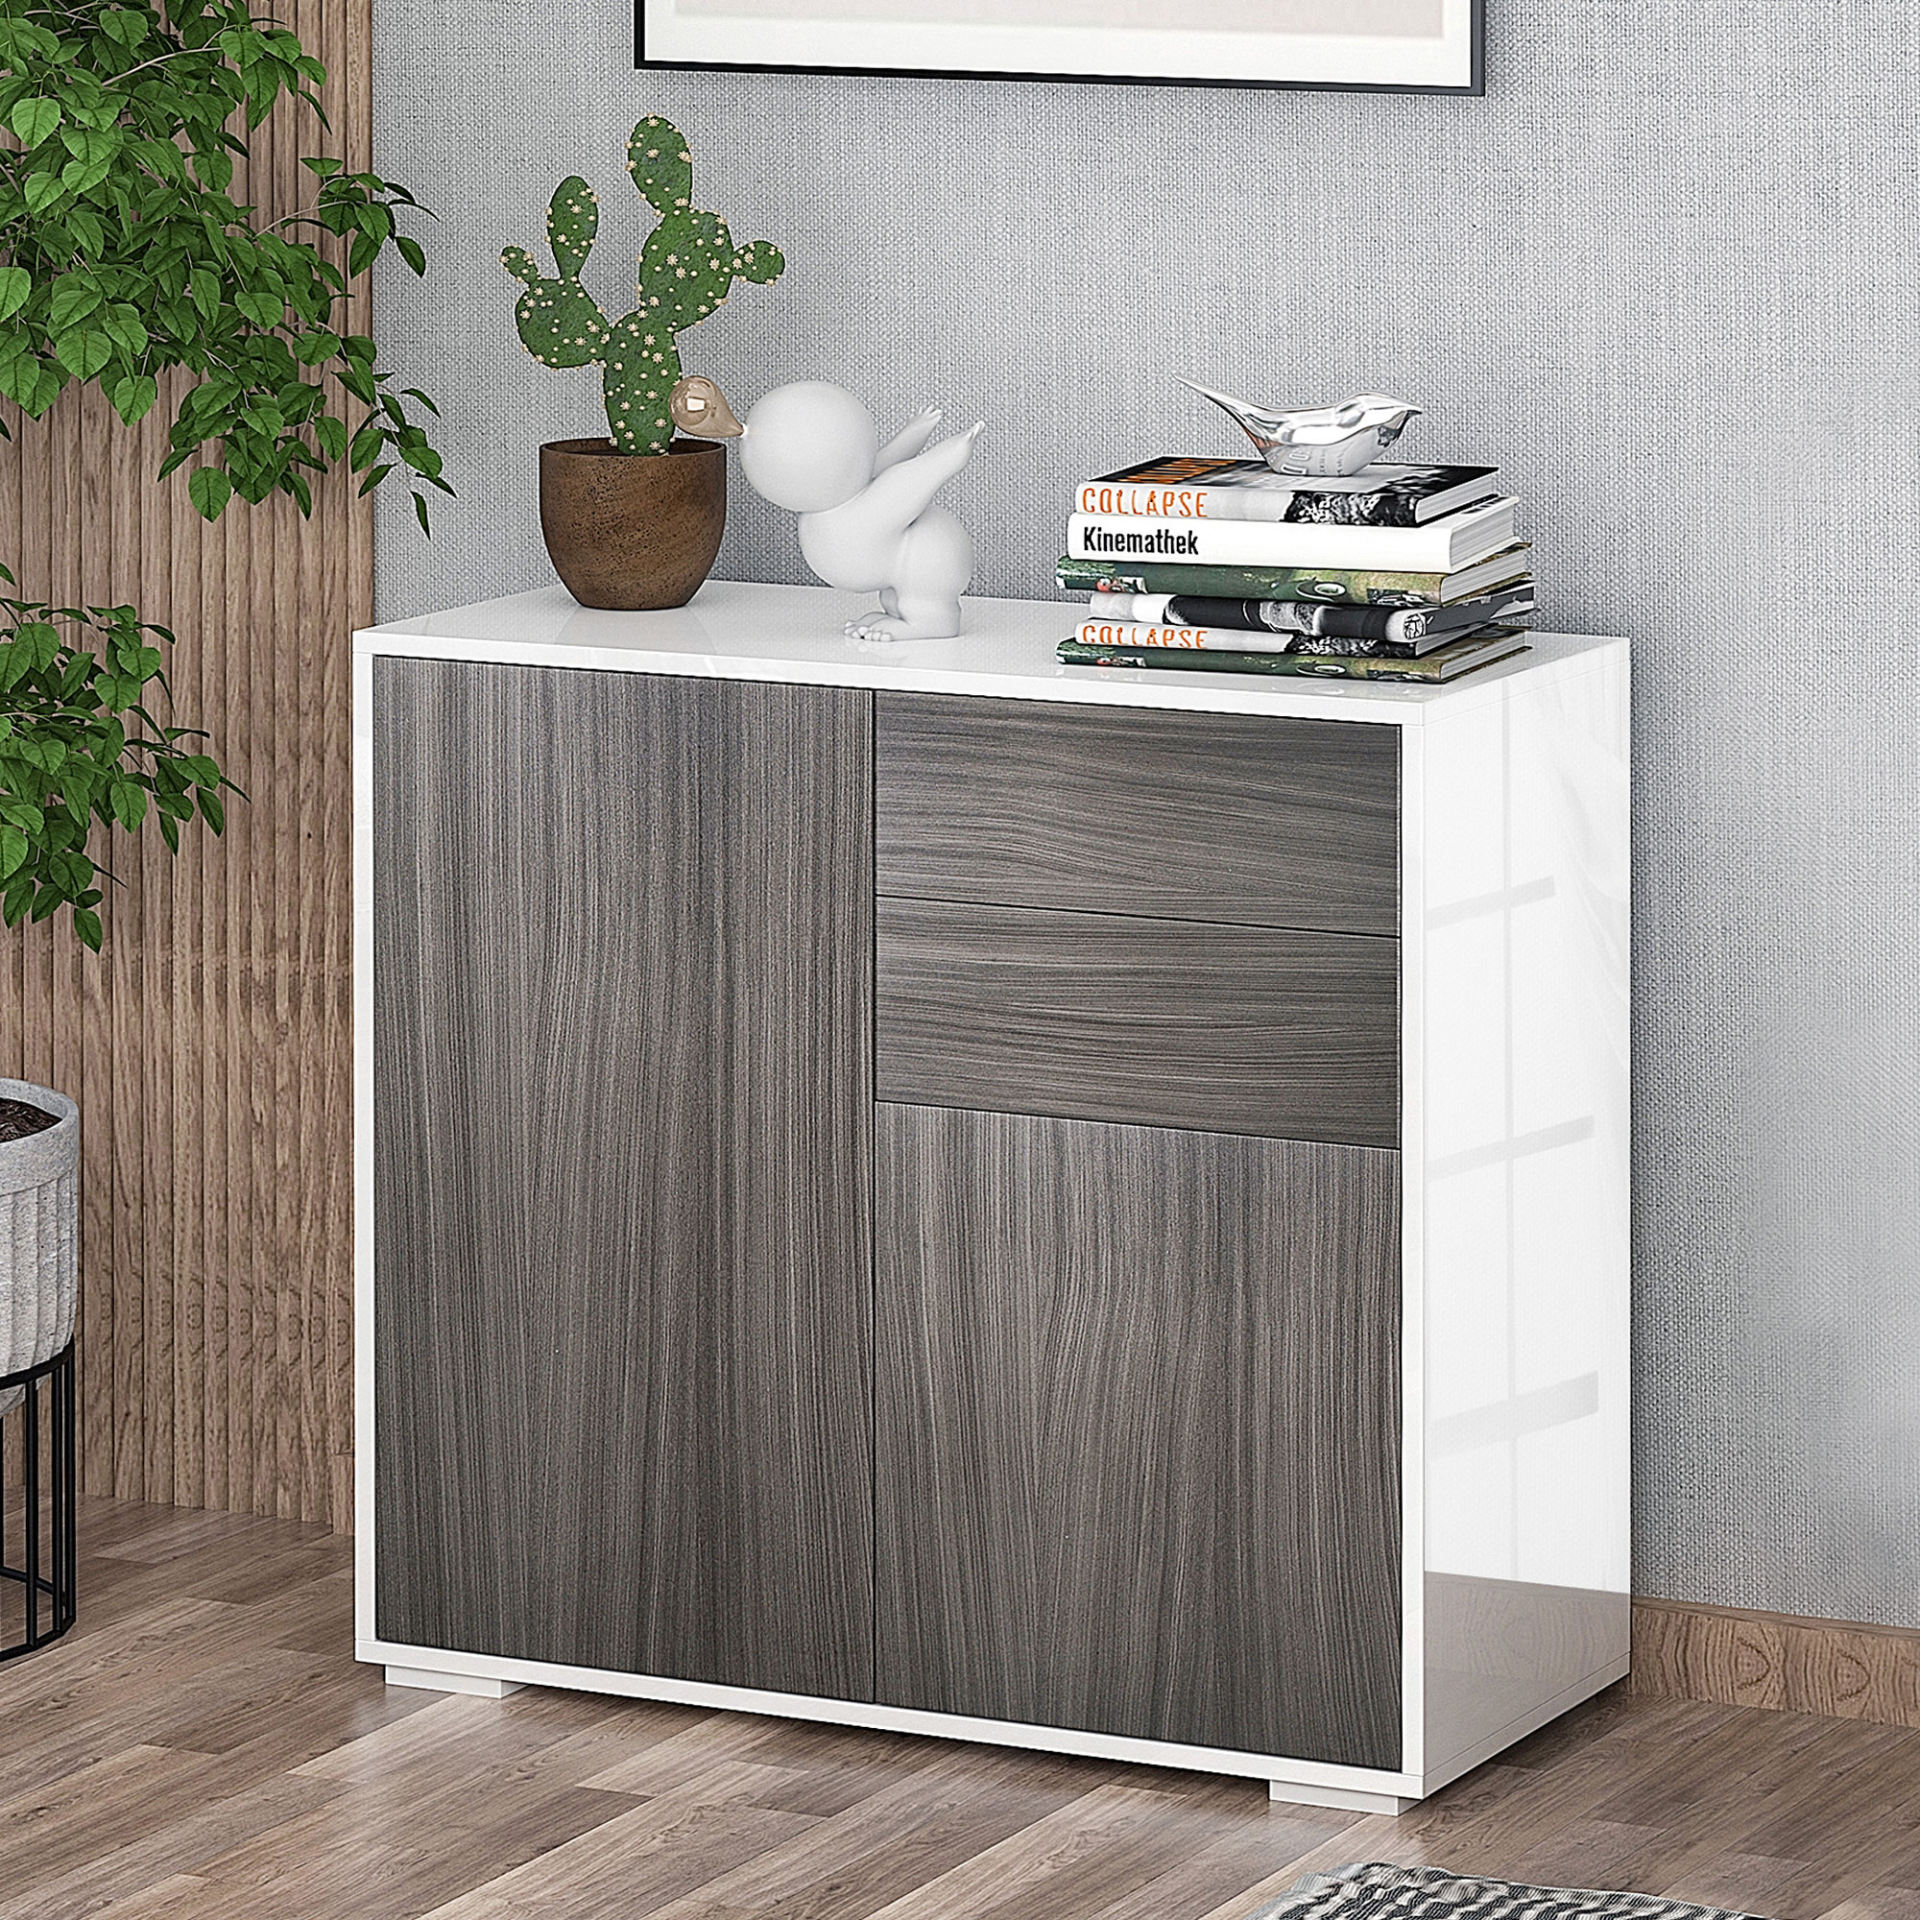 HOMCOM High Gloss Frame Sideboard, Side Cabinet, Push-Open Design with 2 Drawer for Living Room, Bedroom, Grey and White